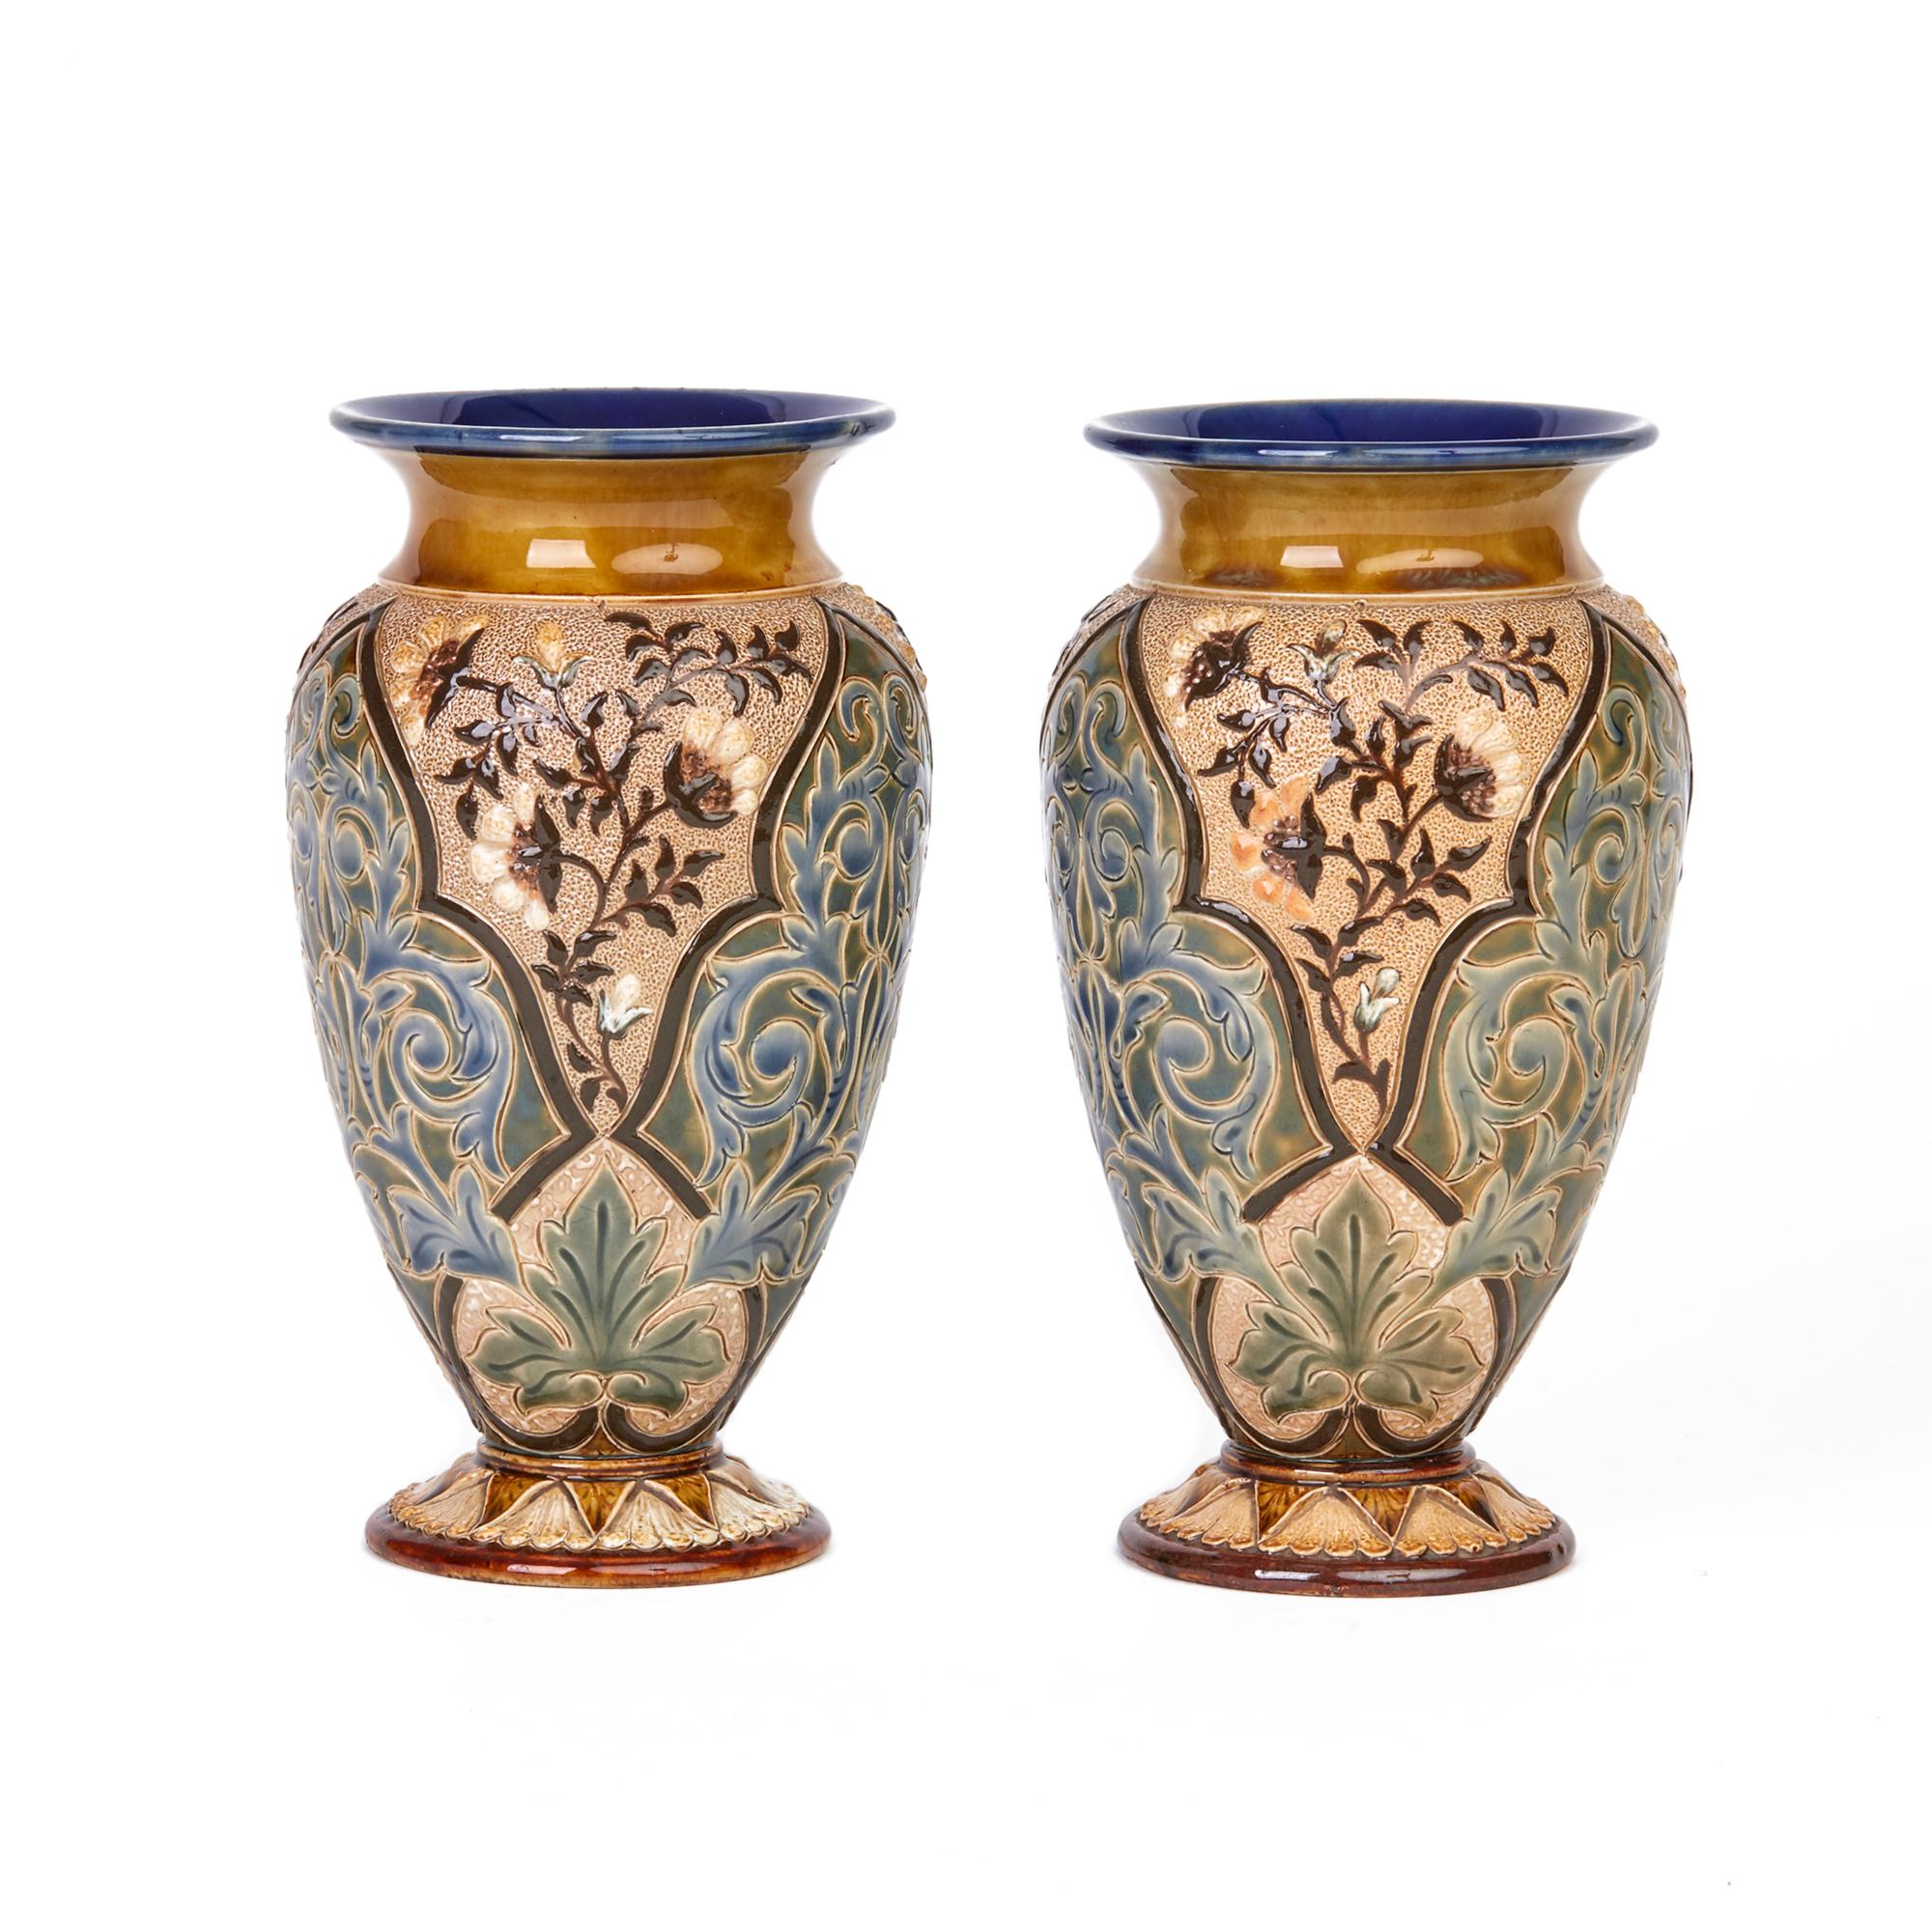 Doulton Lambeth Pair of Exceptional Art Pottery Vases by Alice Barker, 1883 5